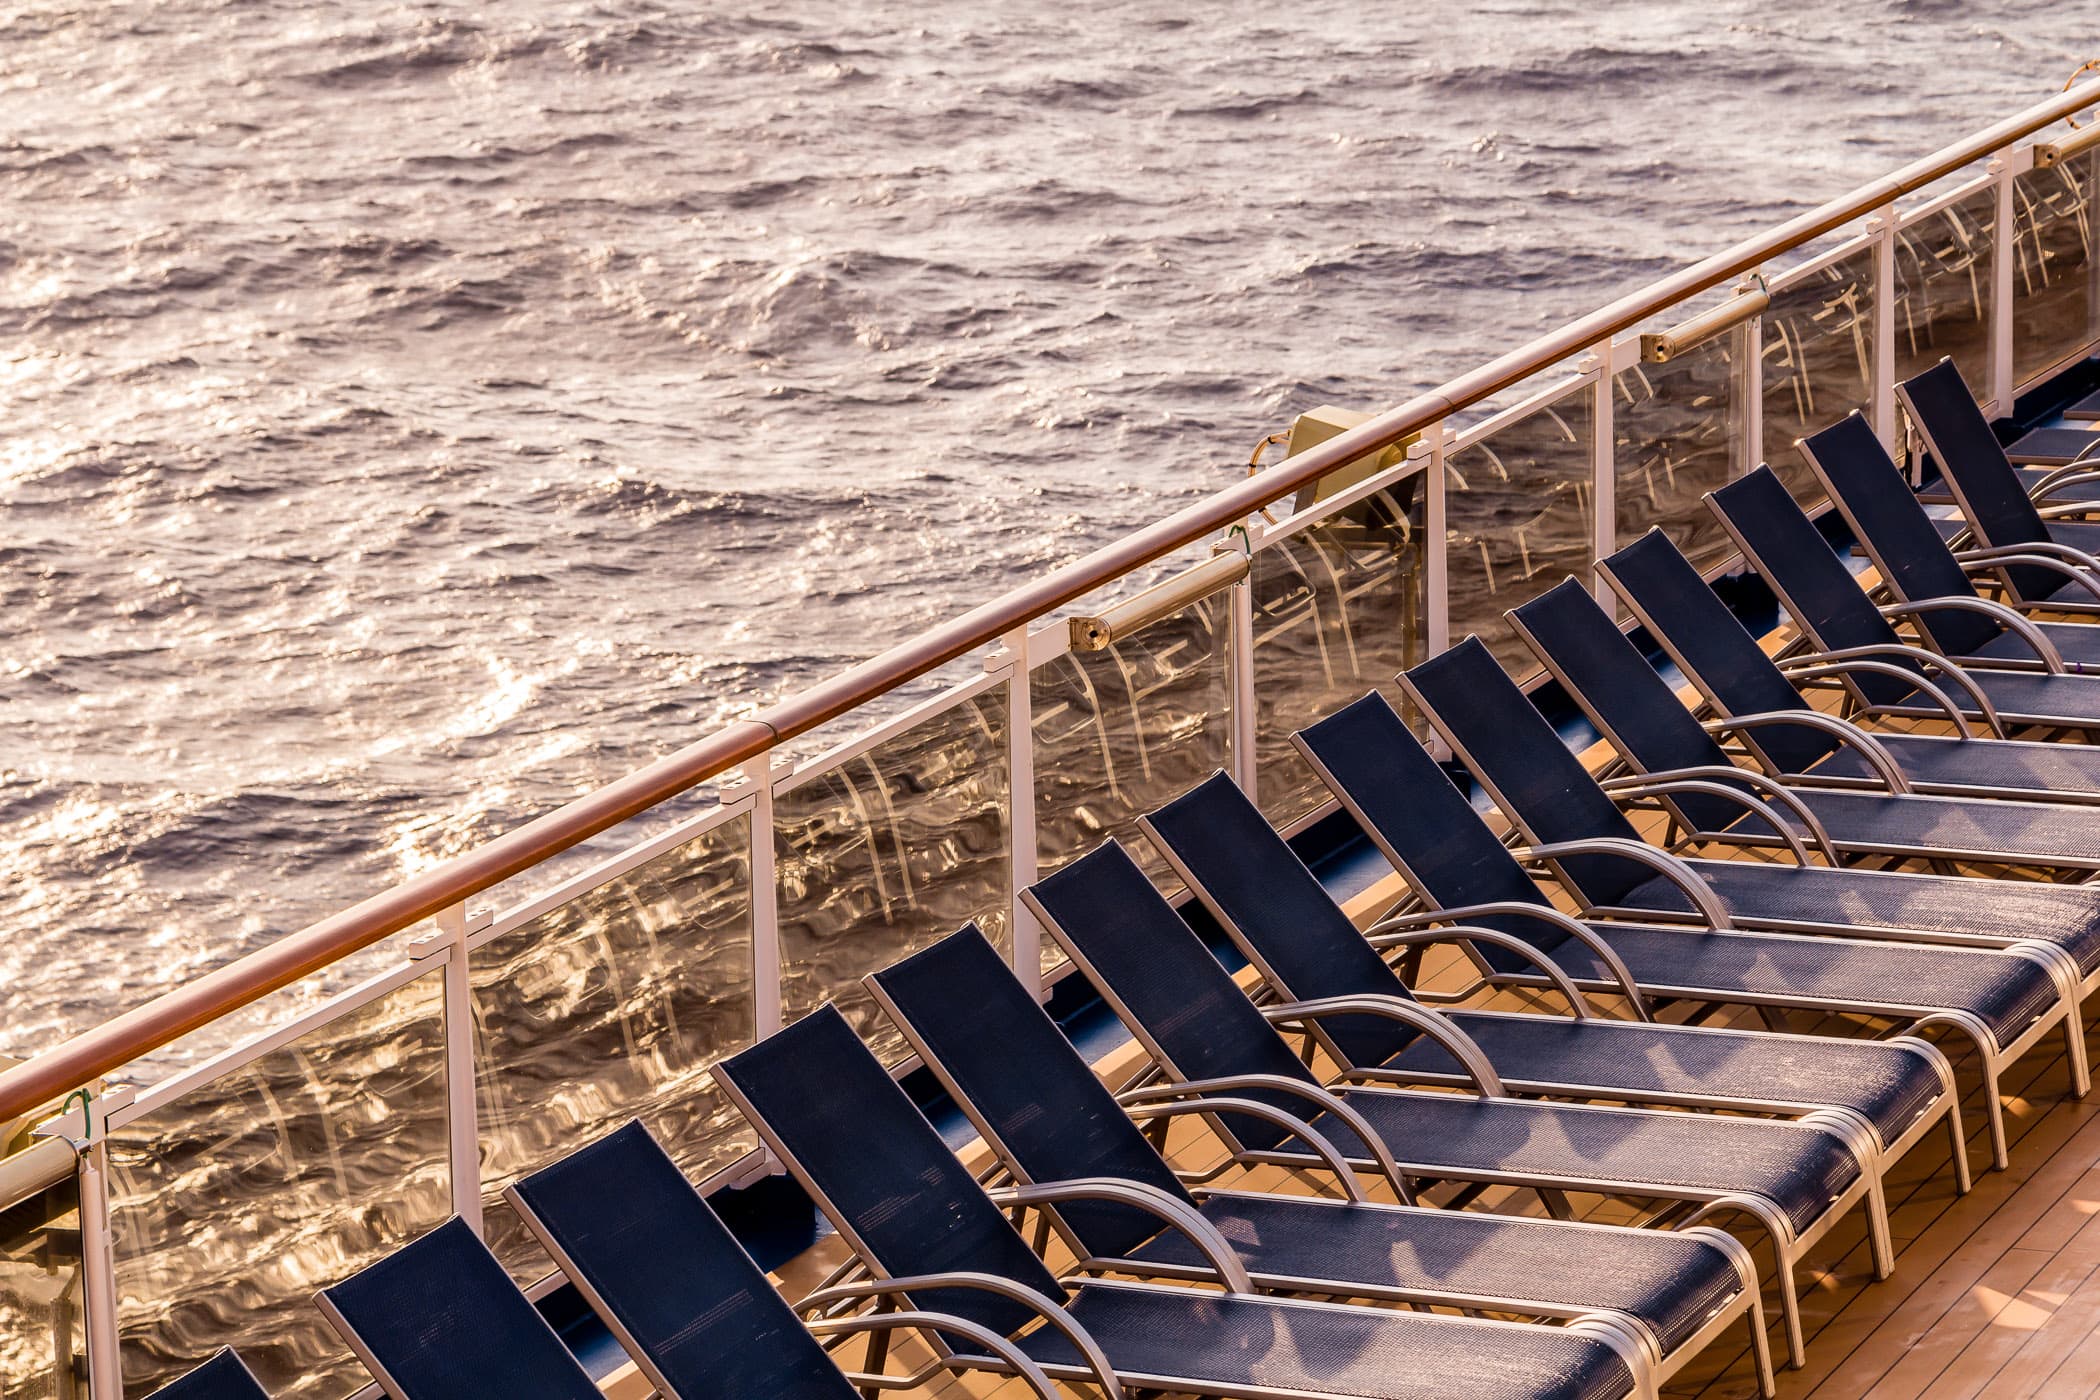 Lounge chairs greet the morning sun aboard the cruise ship Carnival Magic, somewhere in the Gulf of Mexico.